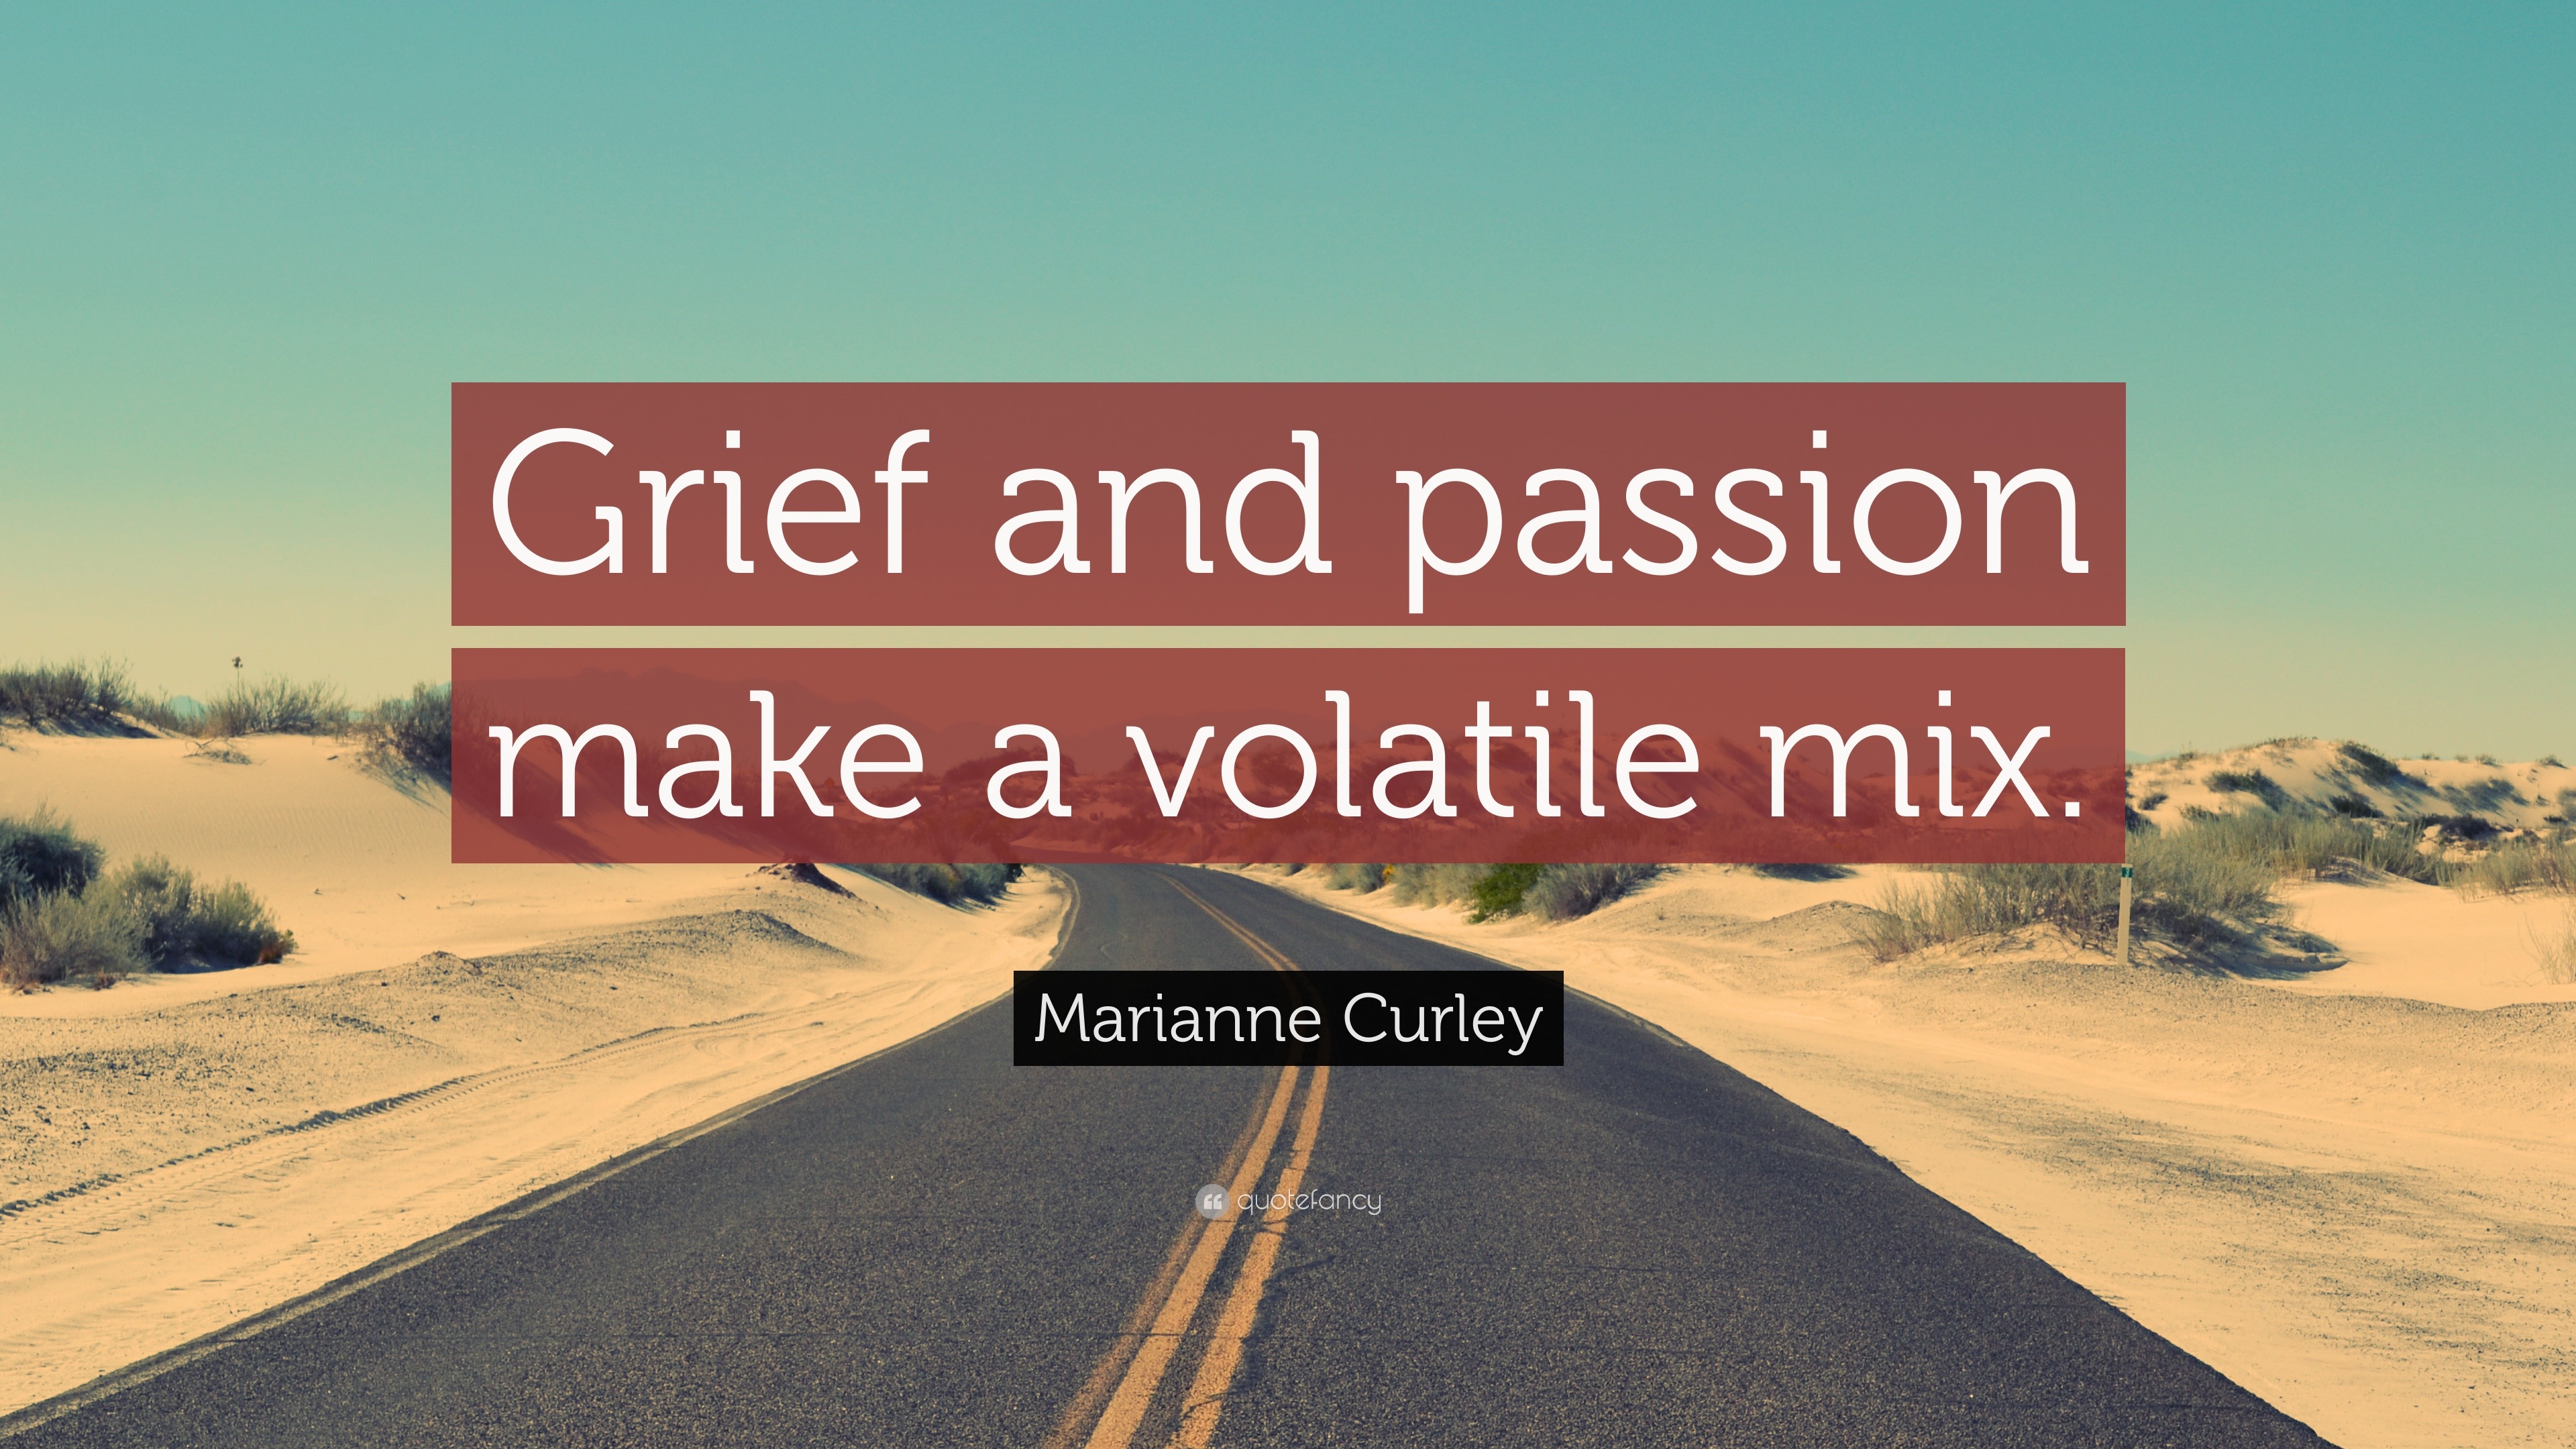 Marianne Curley Quotes (10 wallpapers) - Quotefancy